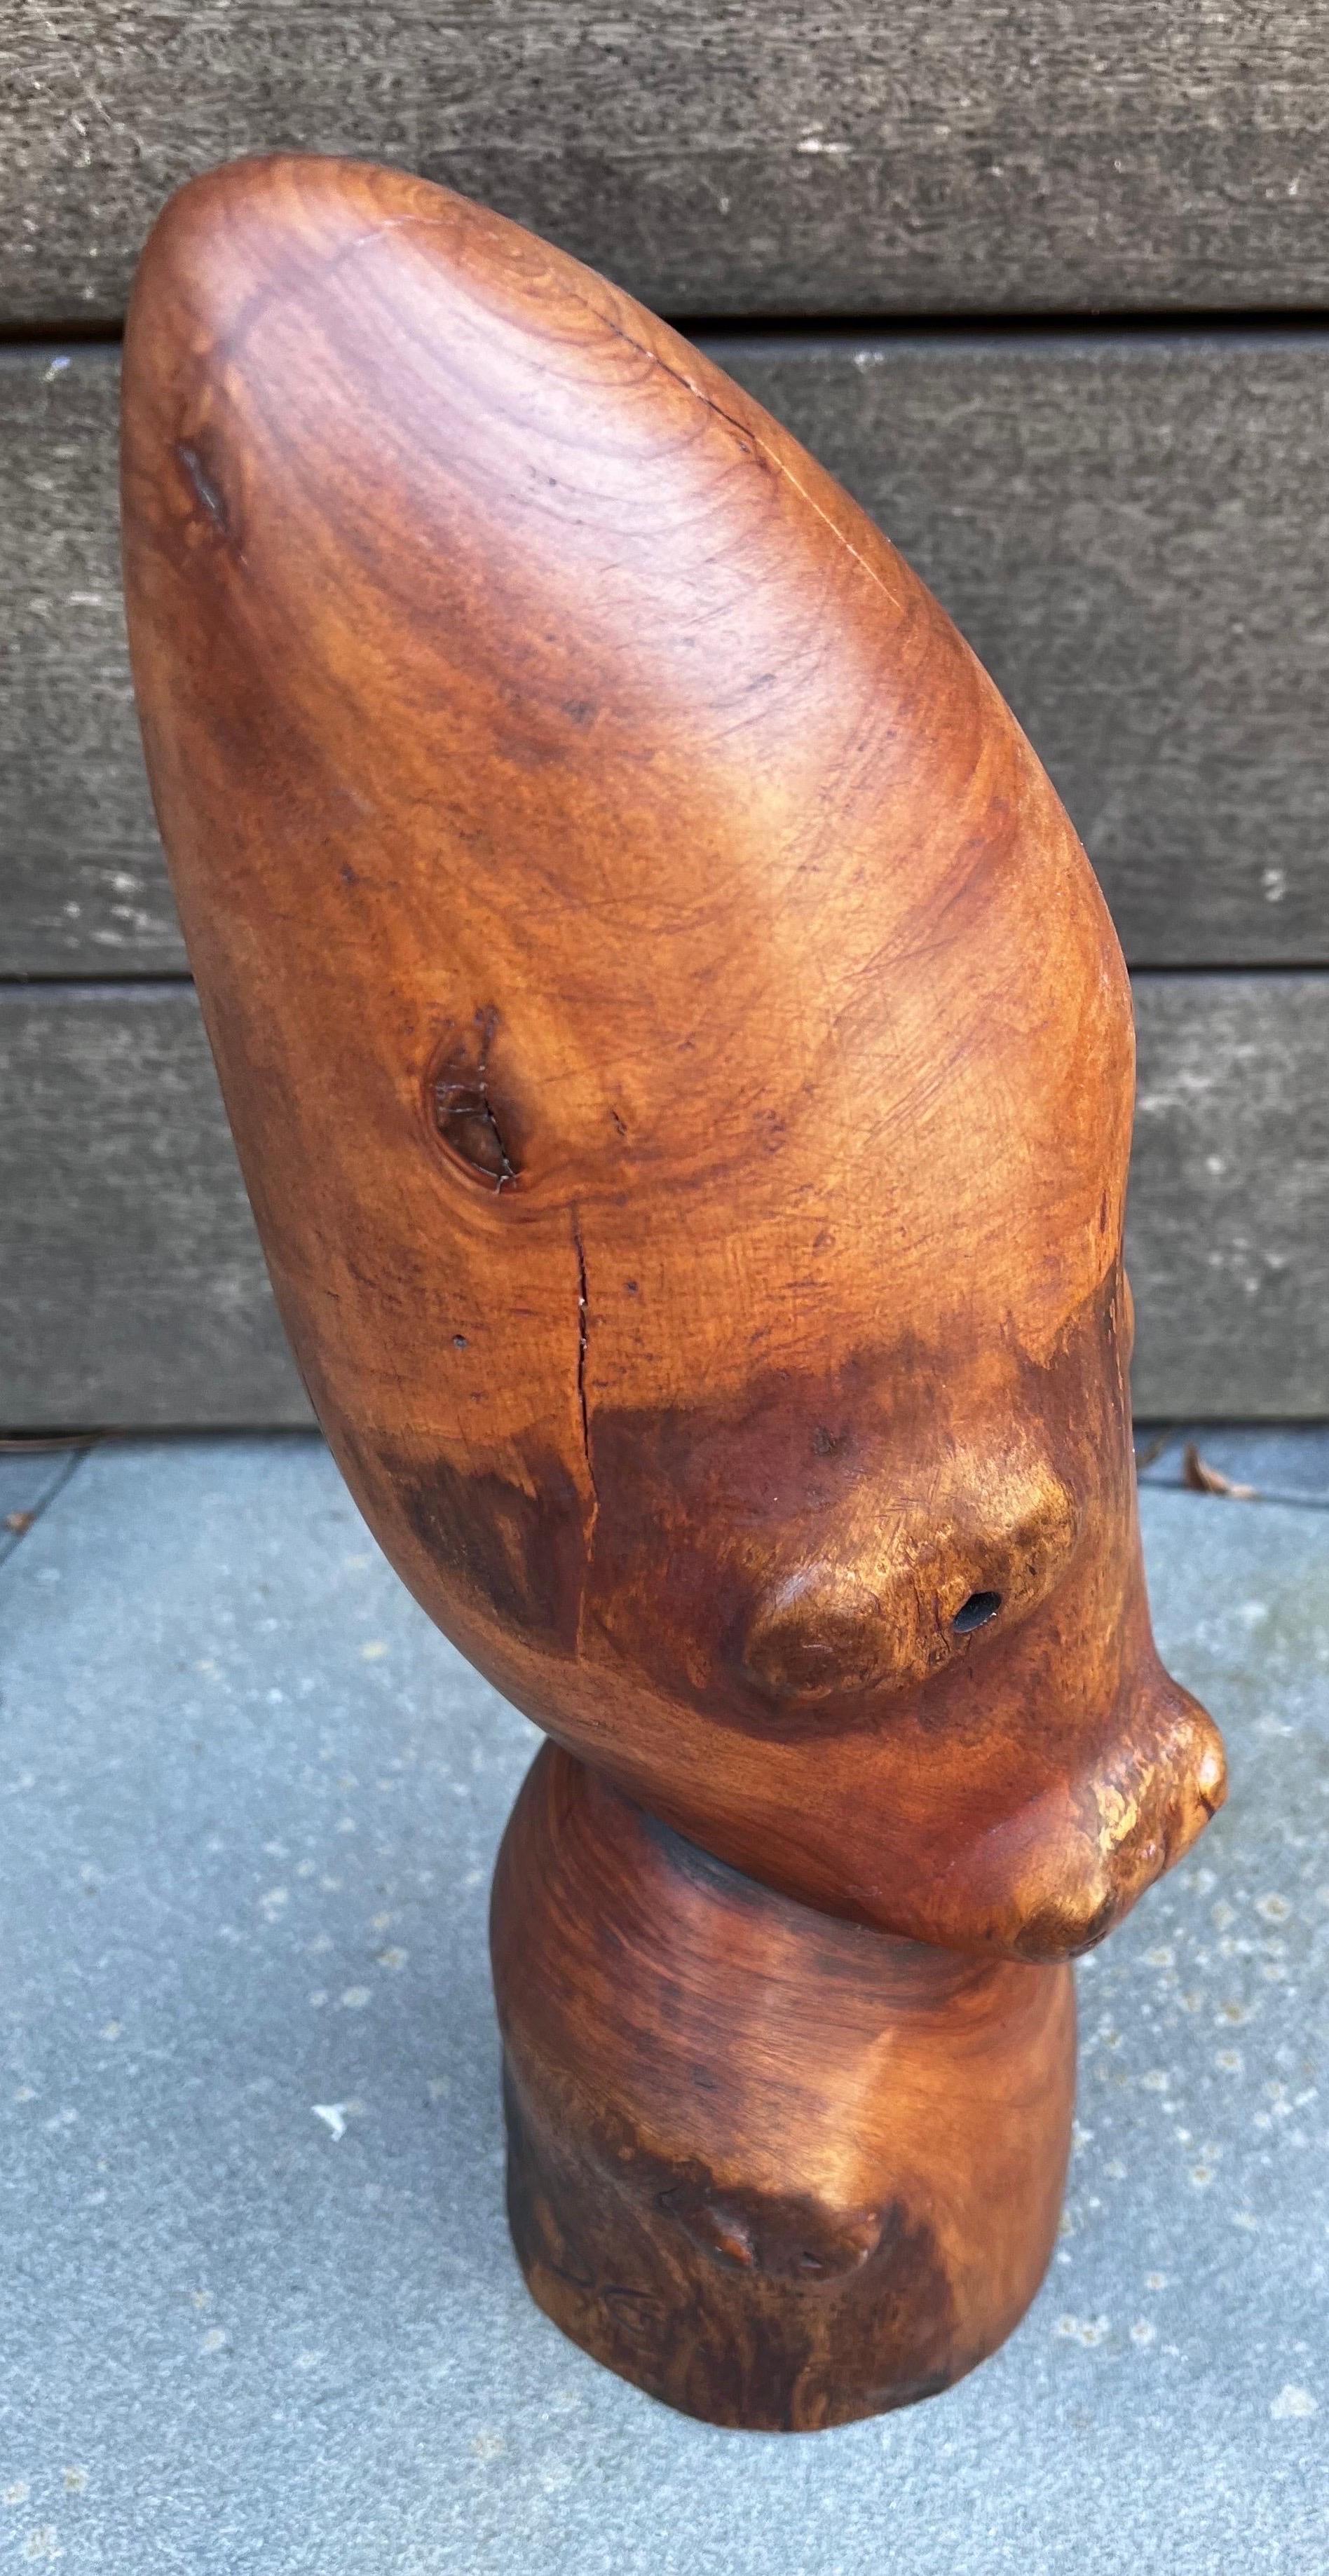 Abstract Wood Sculpture of a Head - signed 6